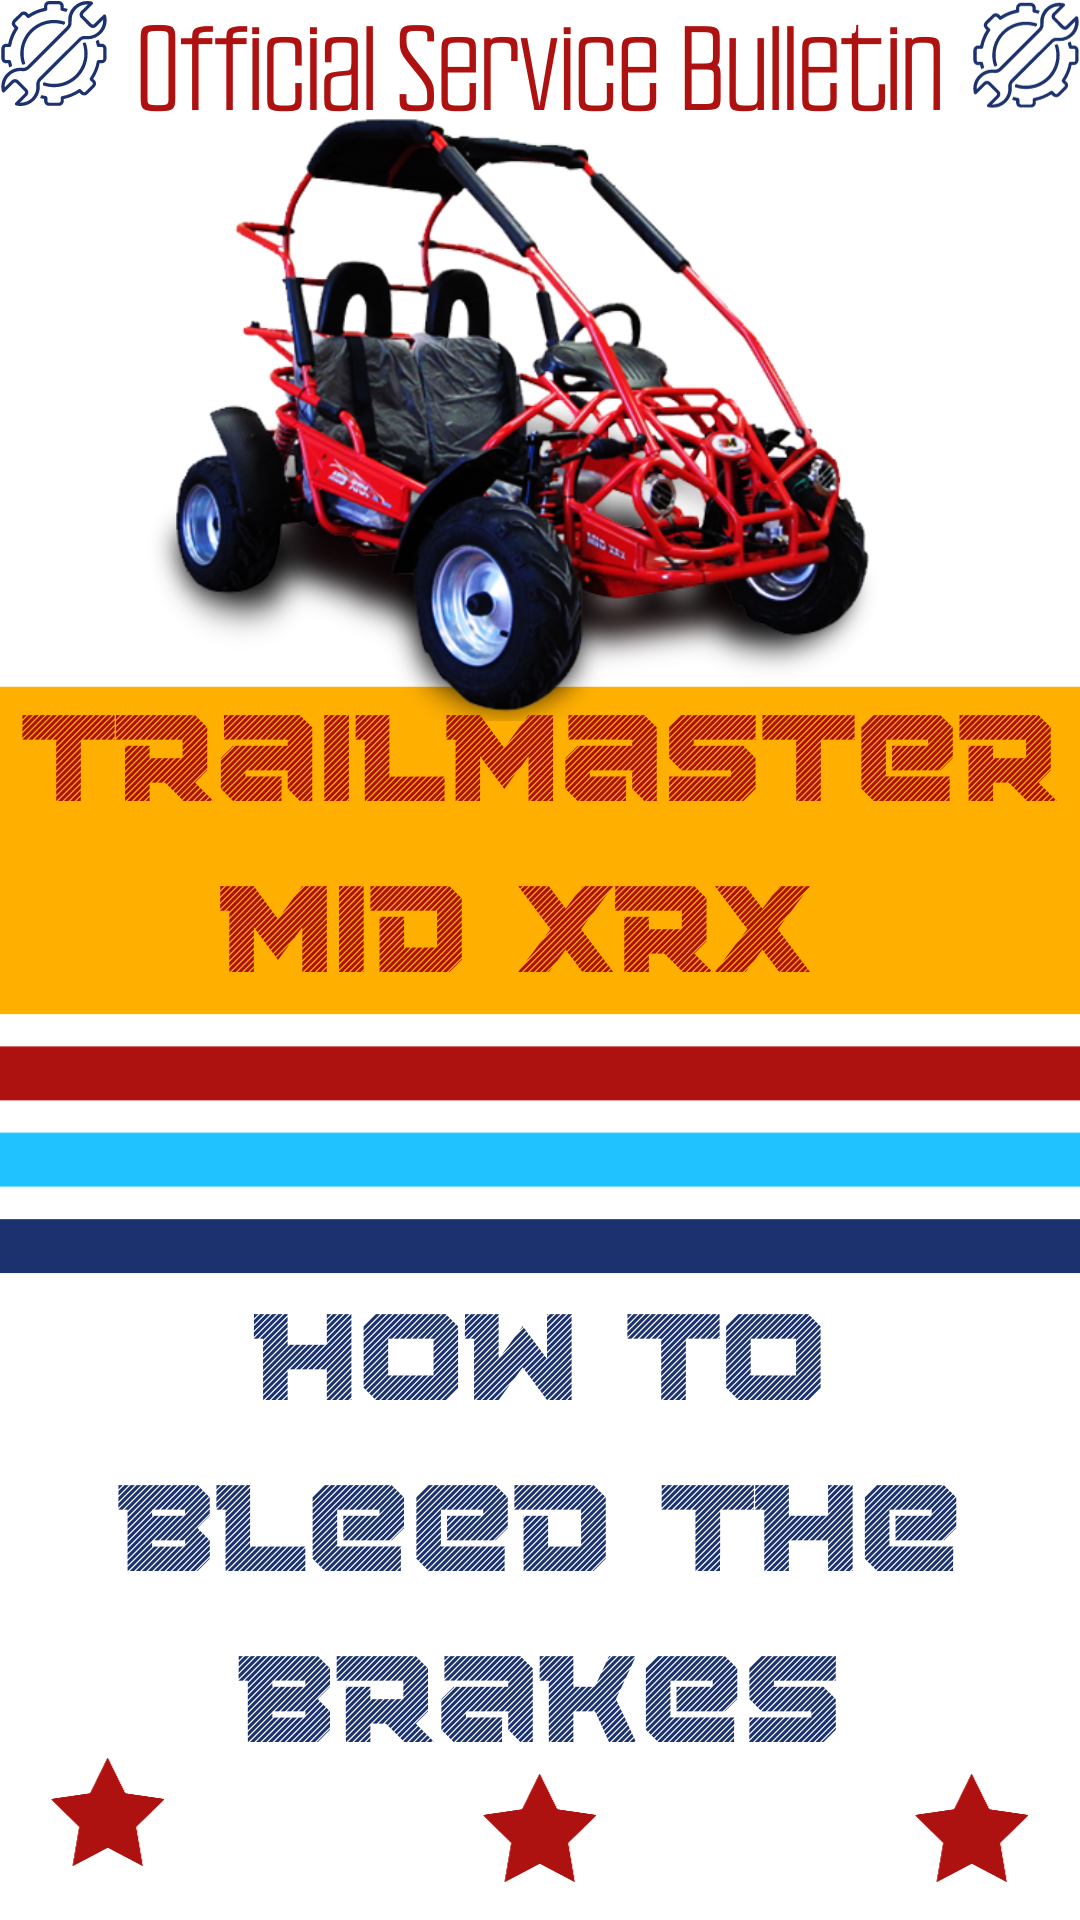 Official Service Bulletin for blending the brakes on a trailmaster Mid XRX